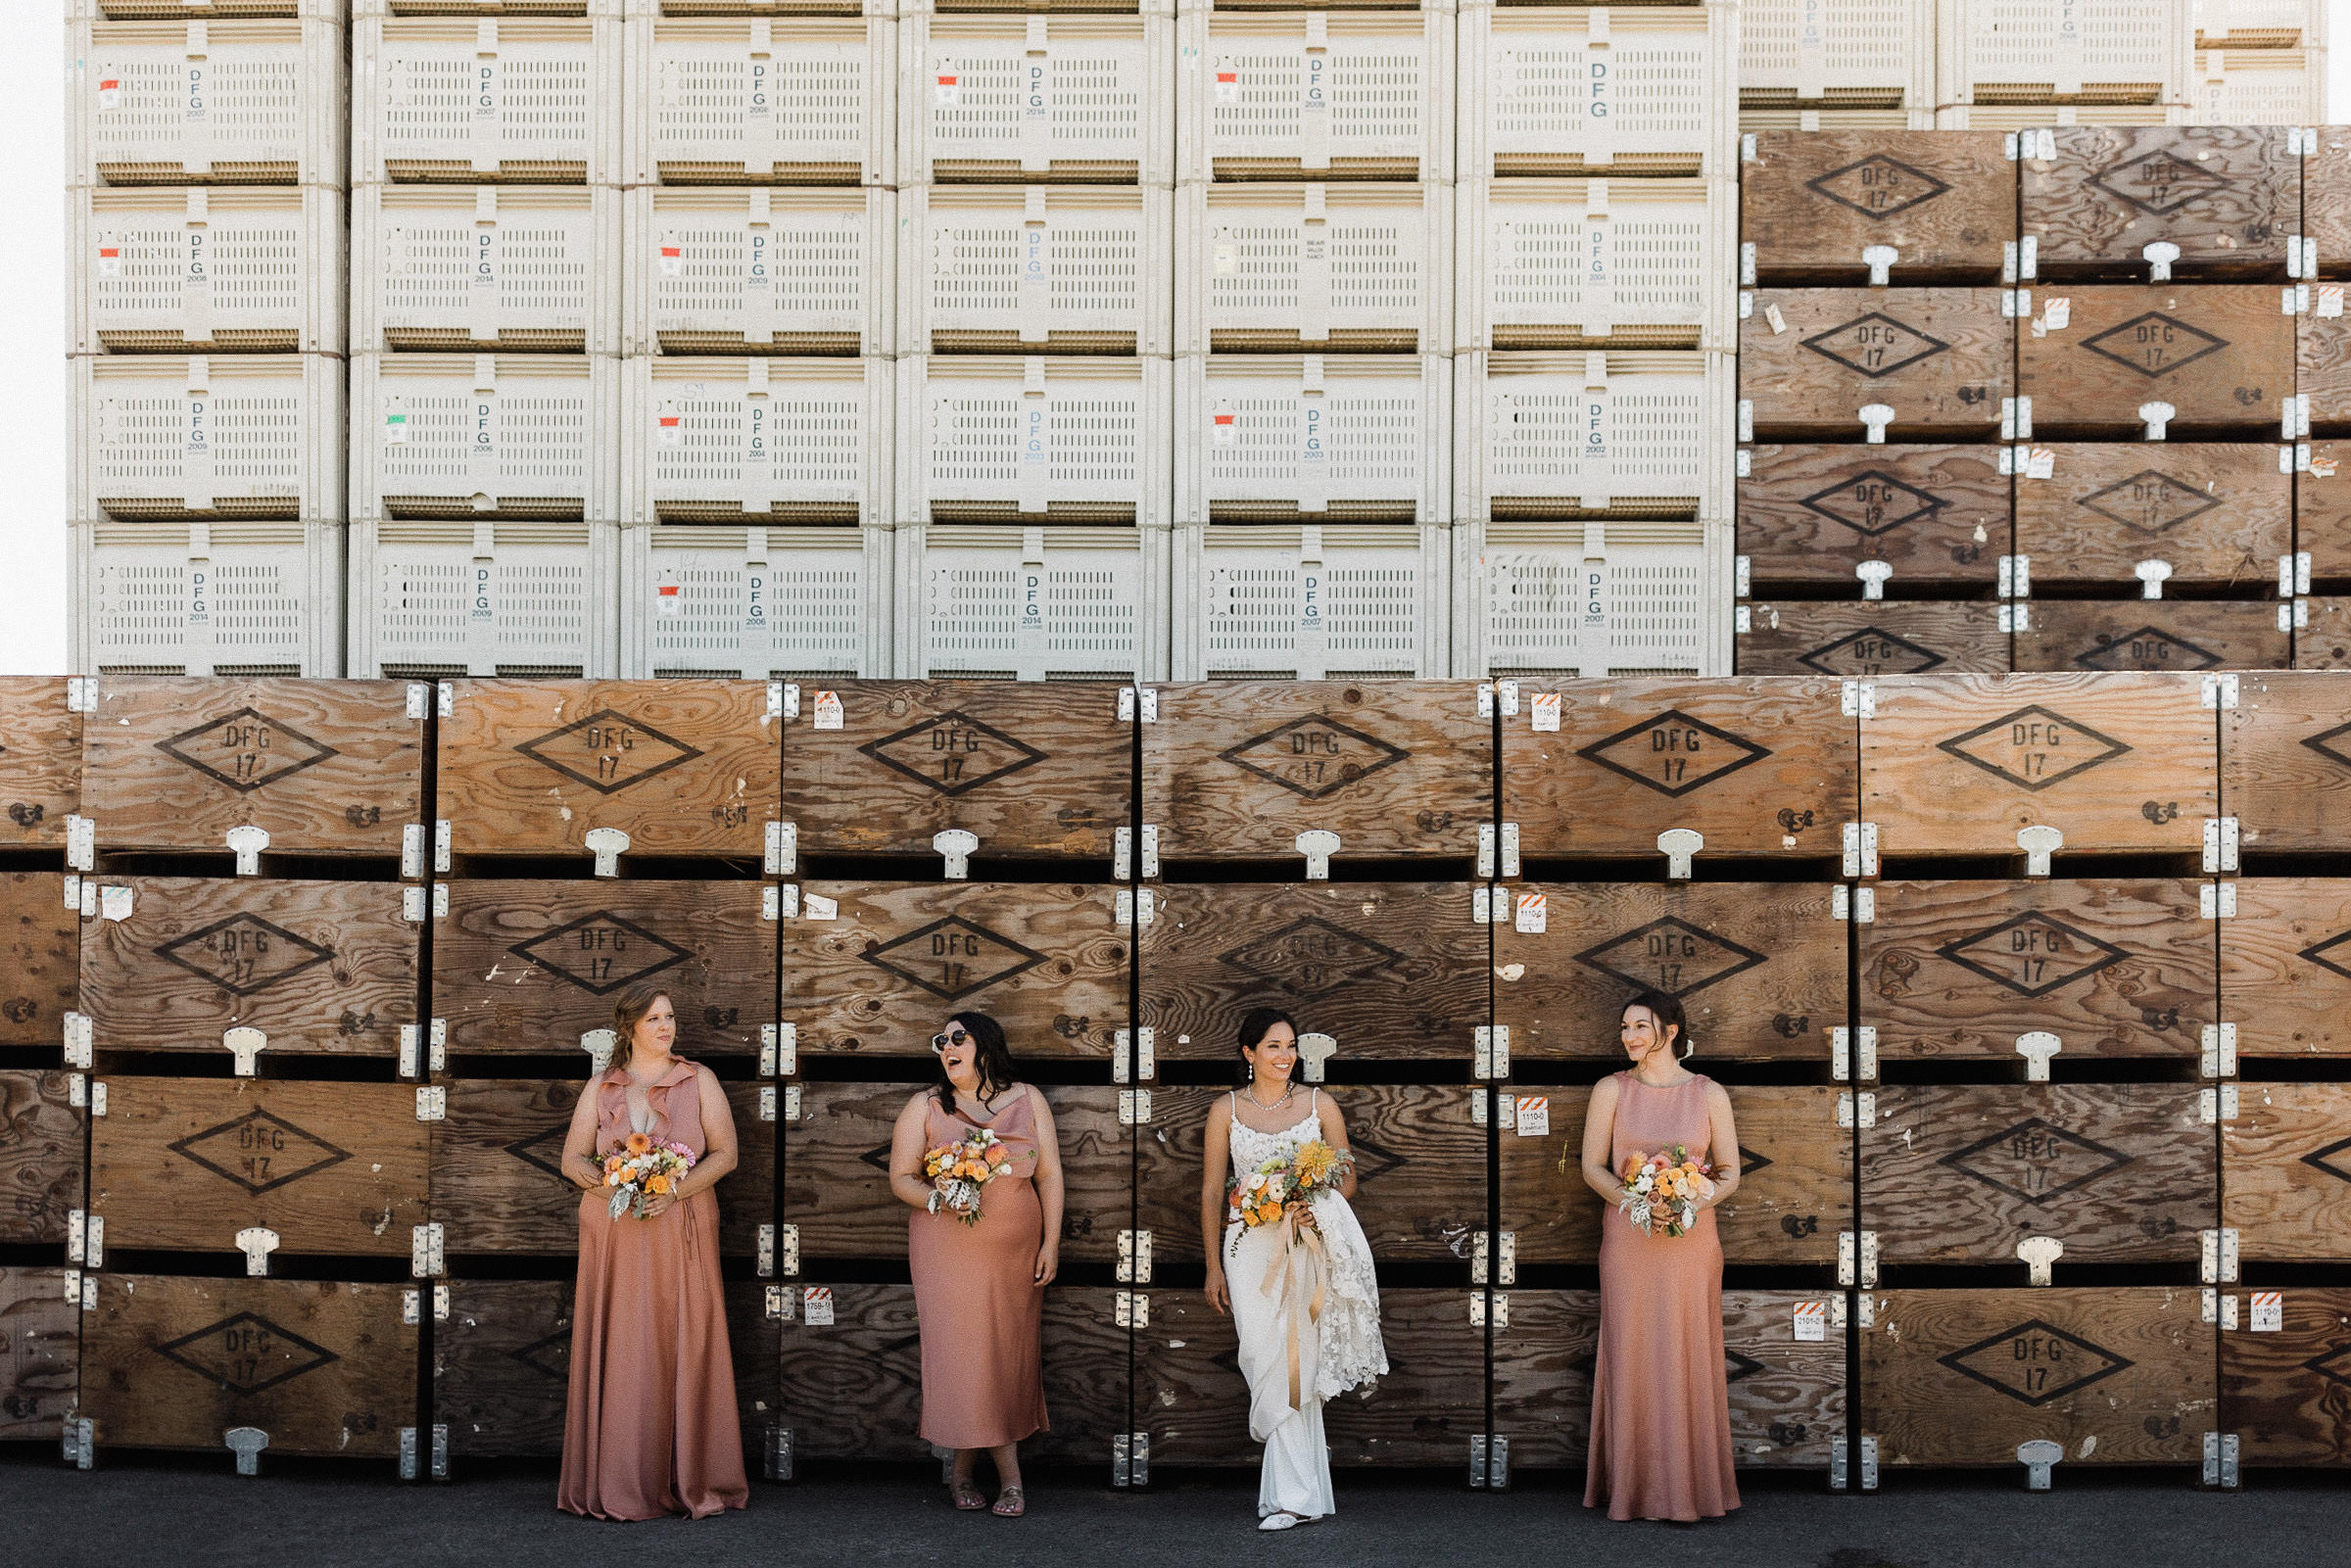 Bride and bridesmaids lined up in front of giant stack of orchard crates